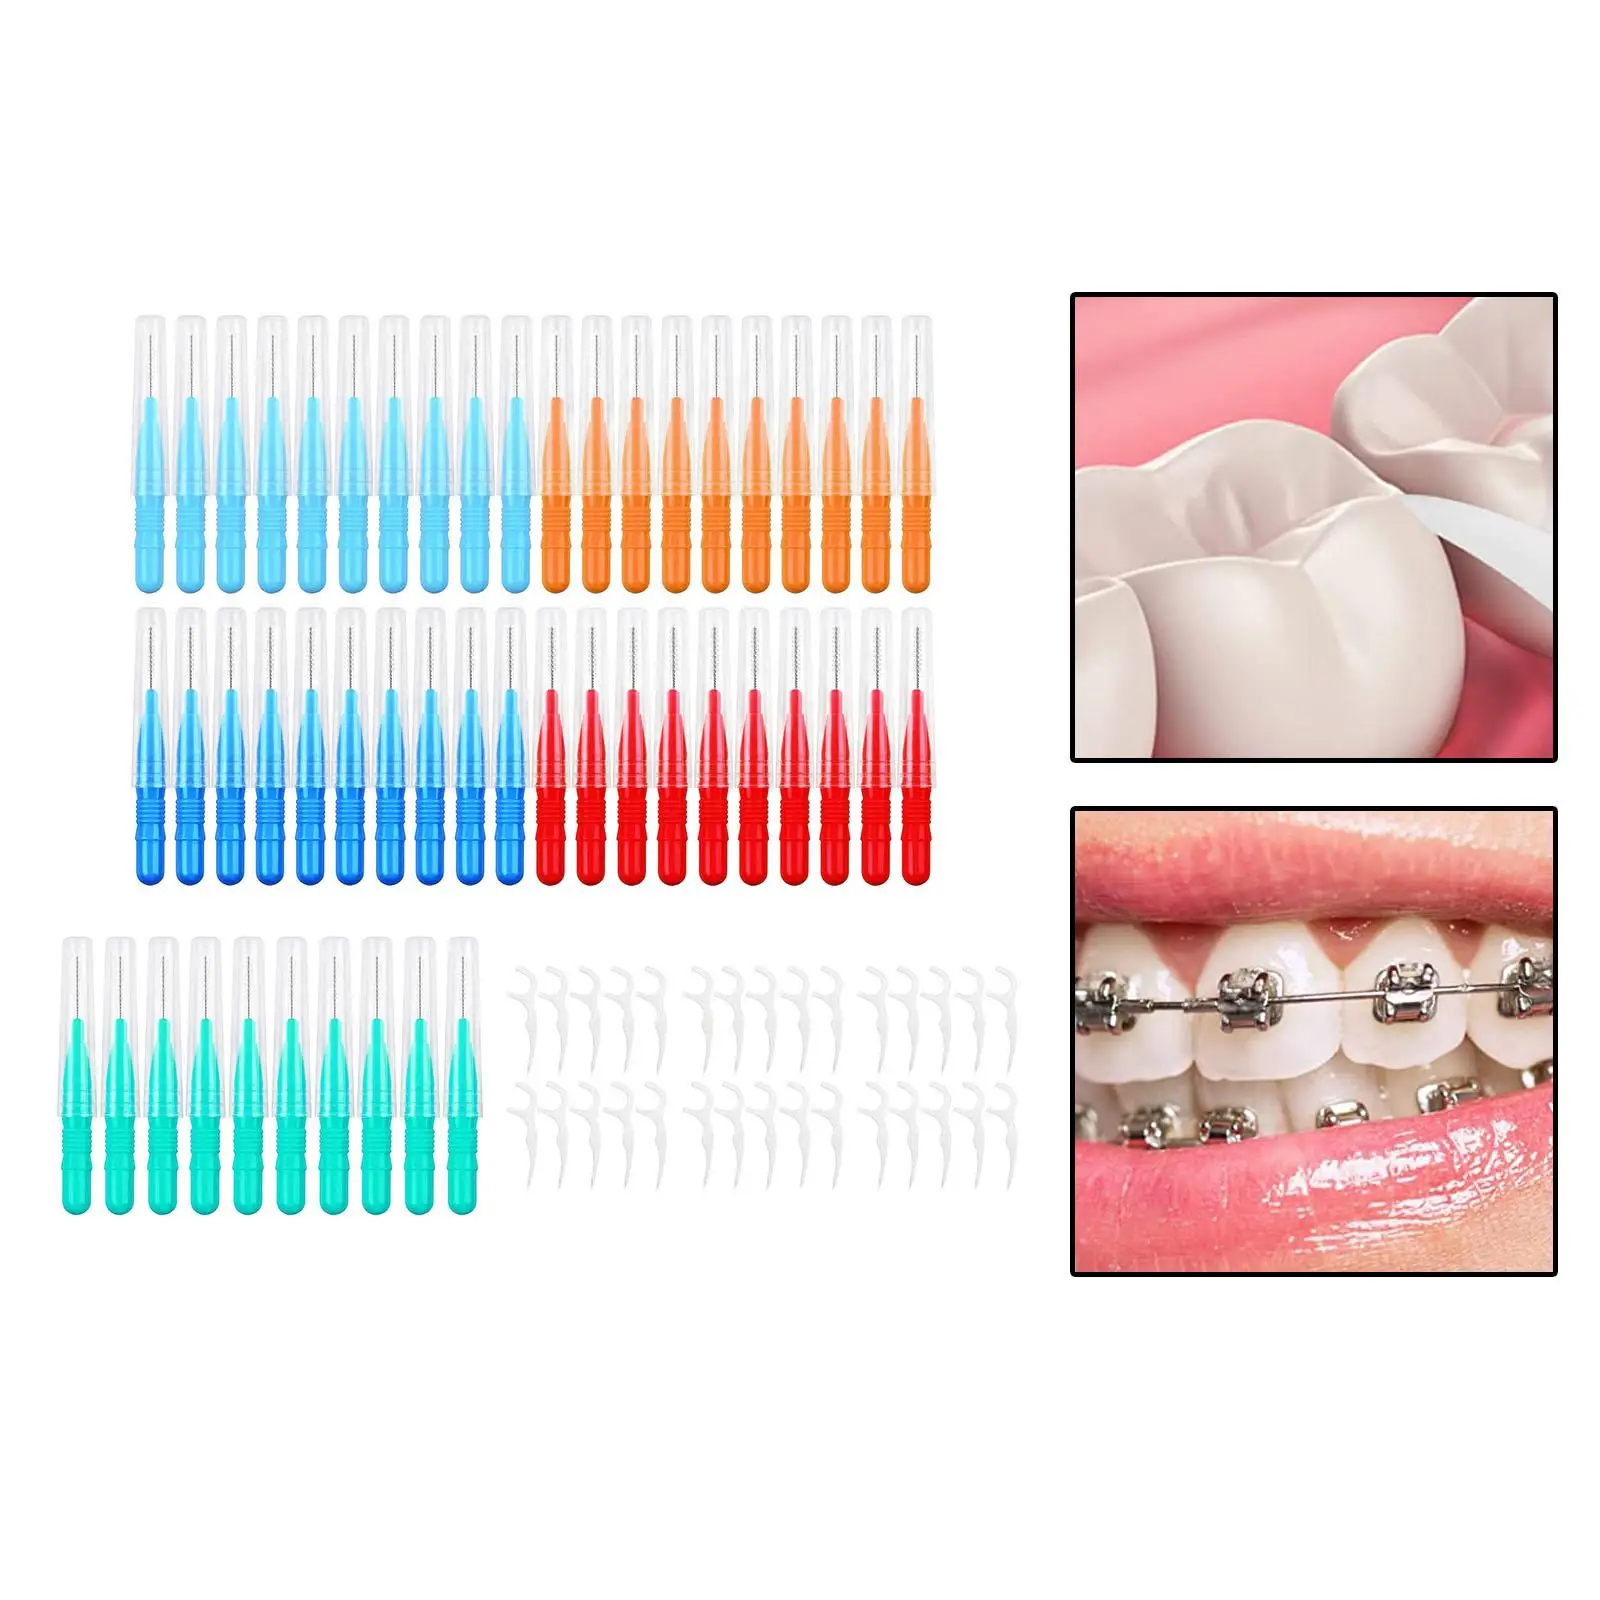 50x Interdental Brushes for Removing Food and Plaque Between Teeth 2/2.5/3mm Portable 30Pcs Floss Sticks Teeth Cleaners